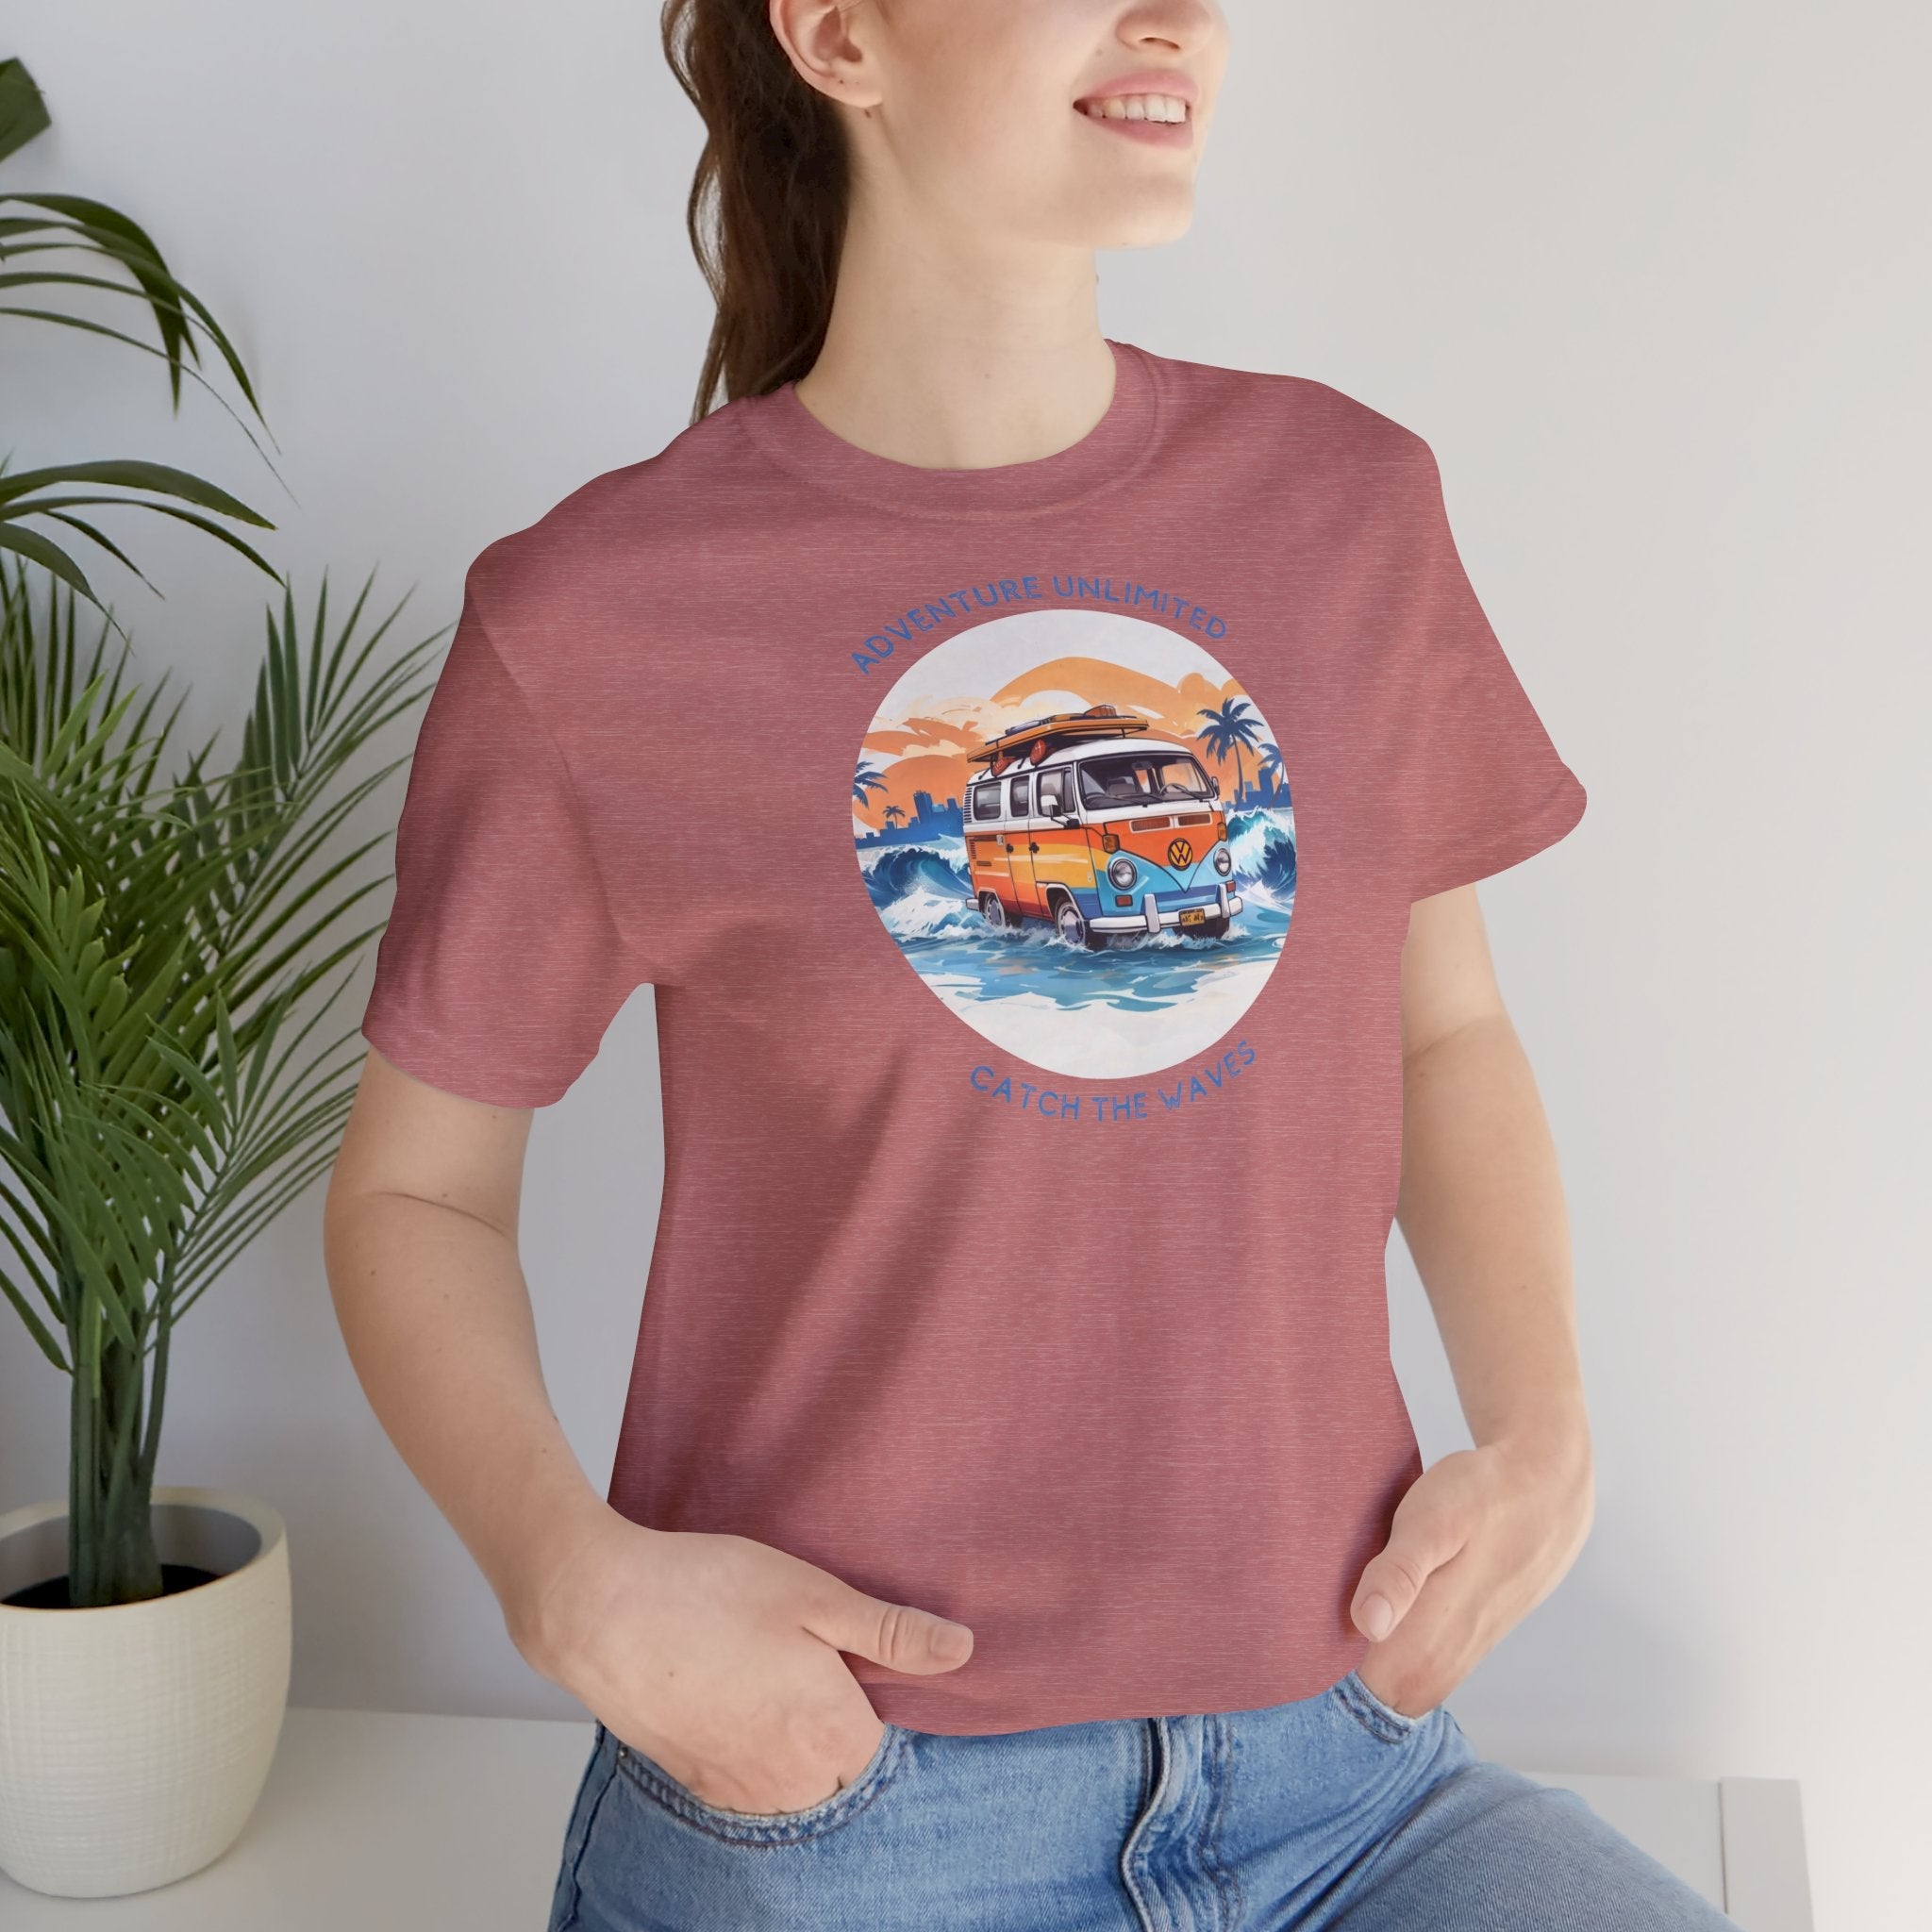 Adventure Unlimited - Surfing T-Shirt - Woman wearing Maroon Graphic Tee